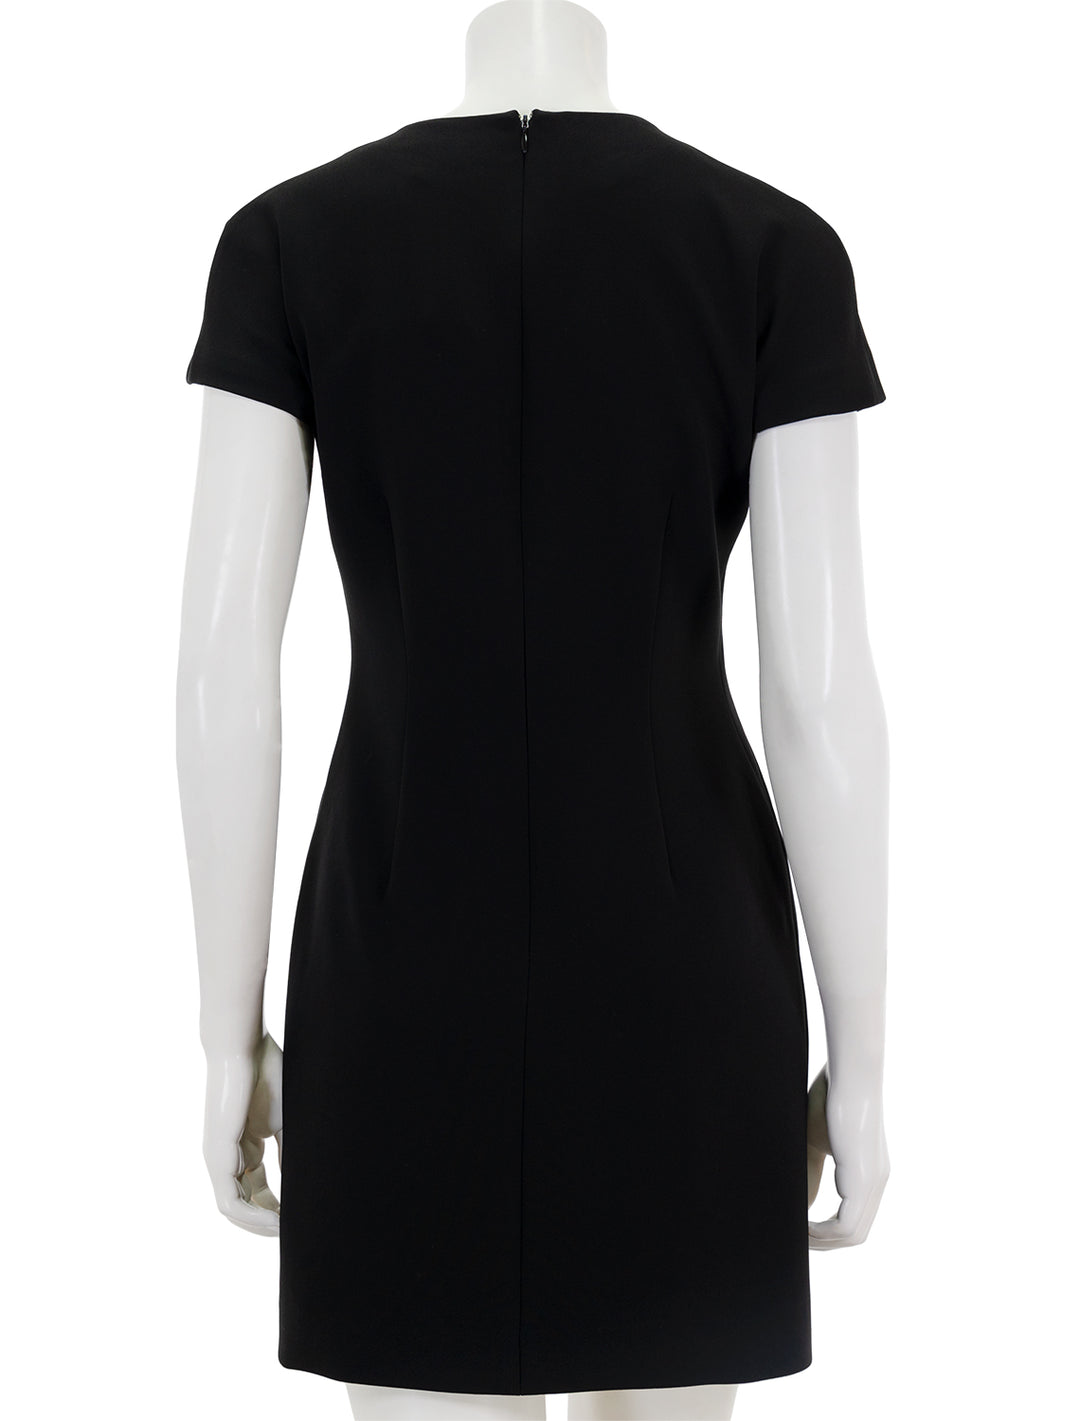 Back view of Theory's dolman short sleeve admirable crepe dress in black.